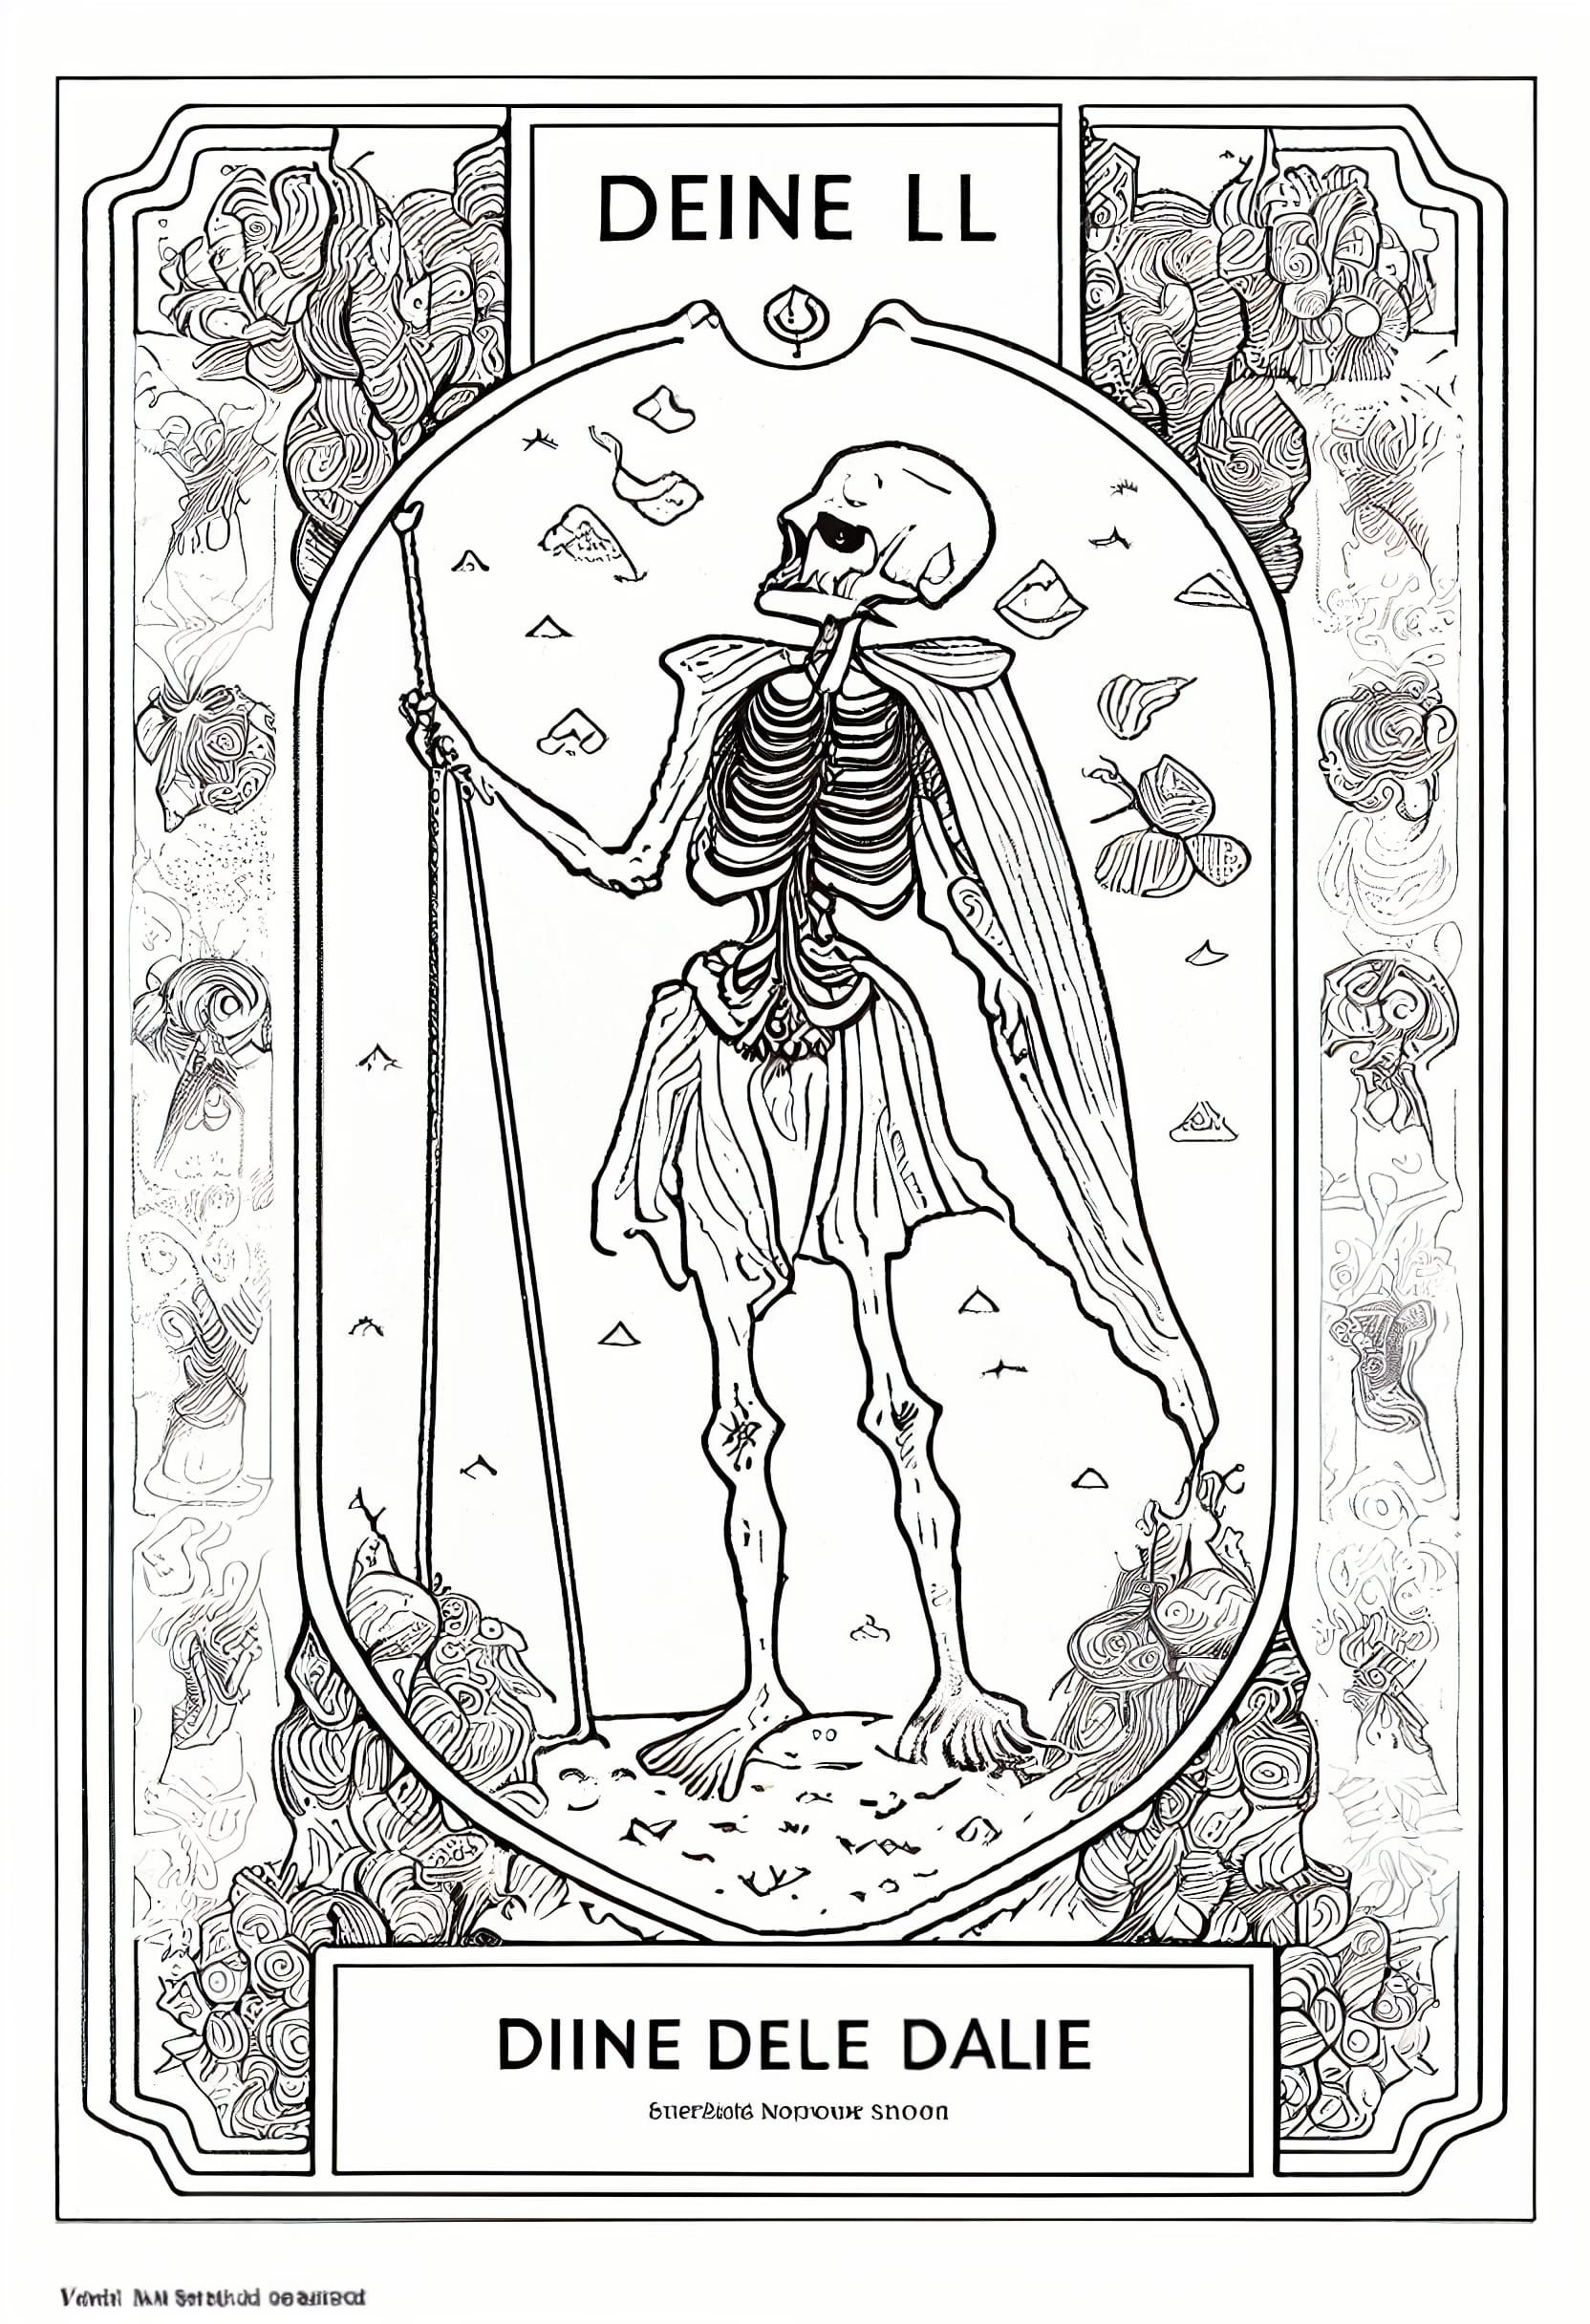 Drawing of a skeleton holding a stick.